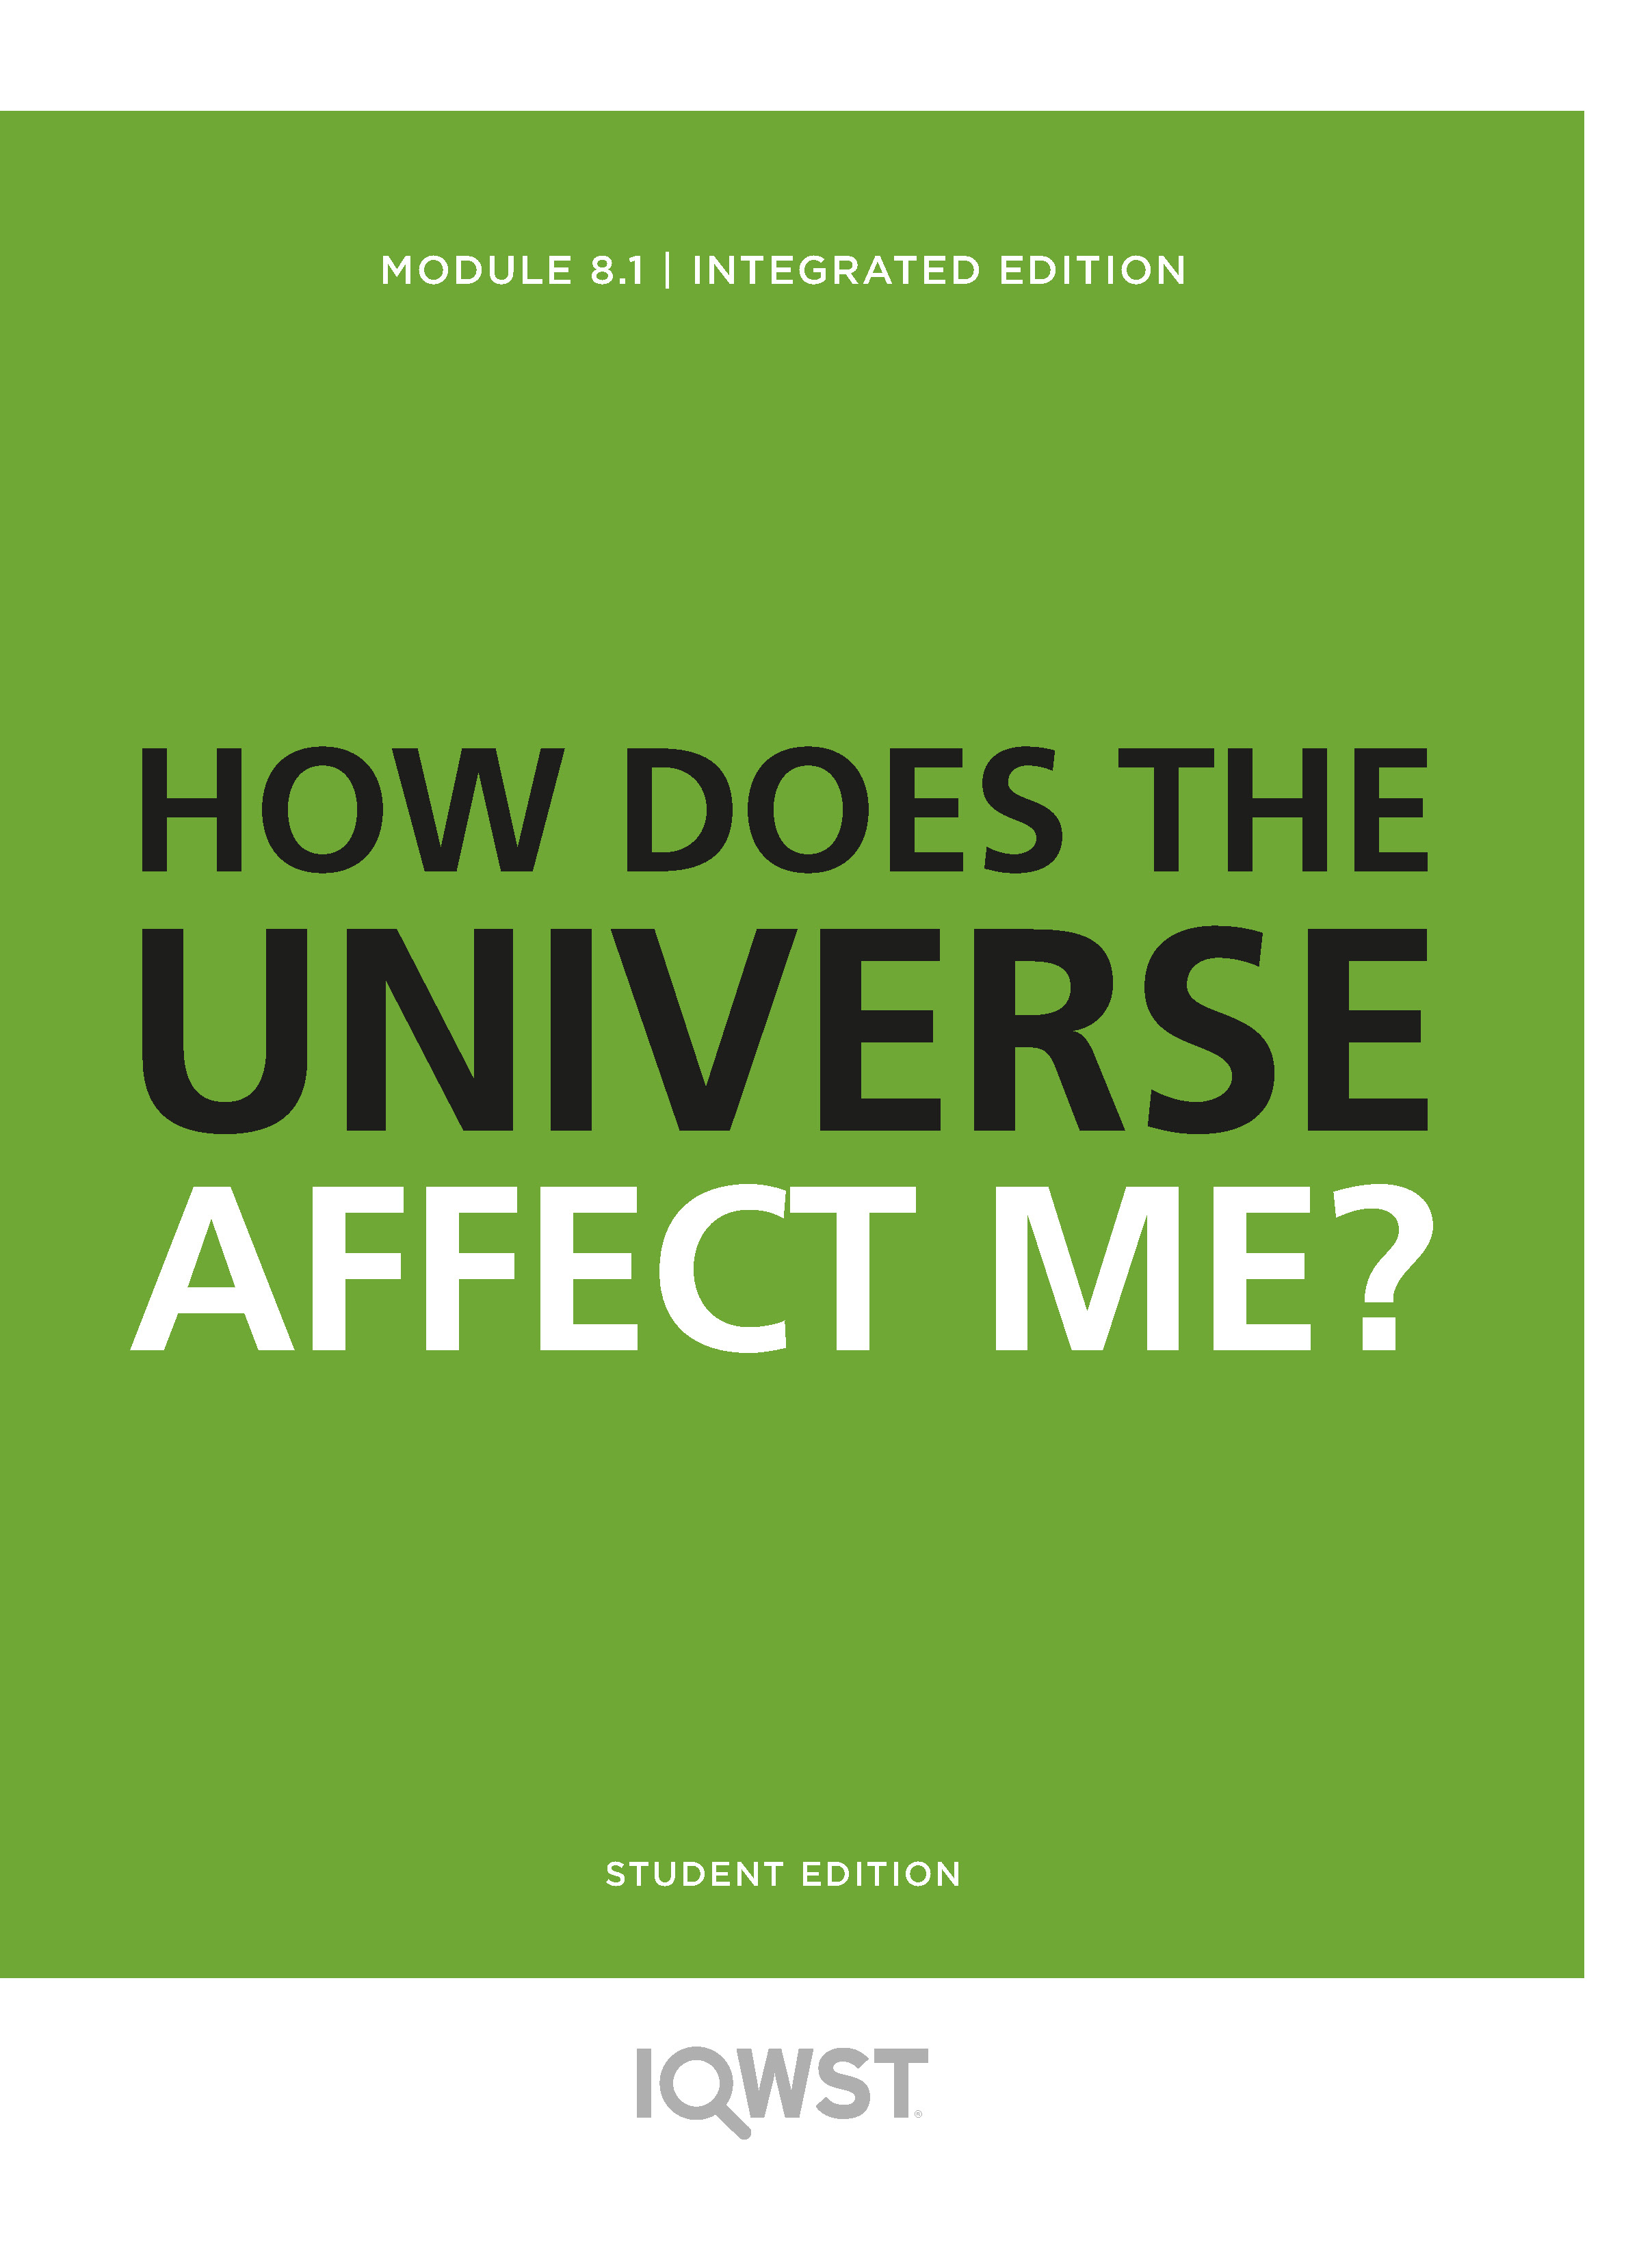 8.1 How Does the Universe Affect Me?